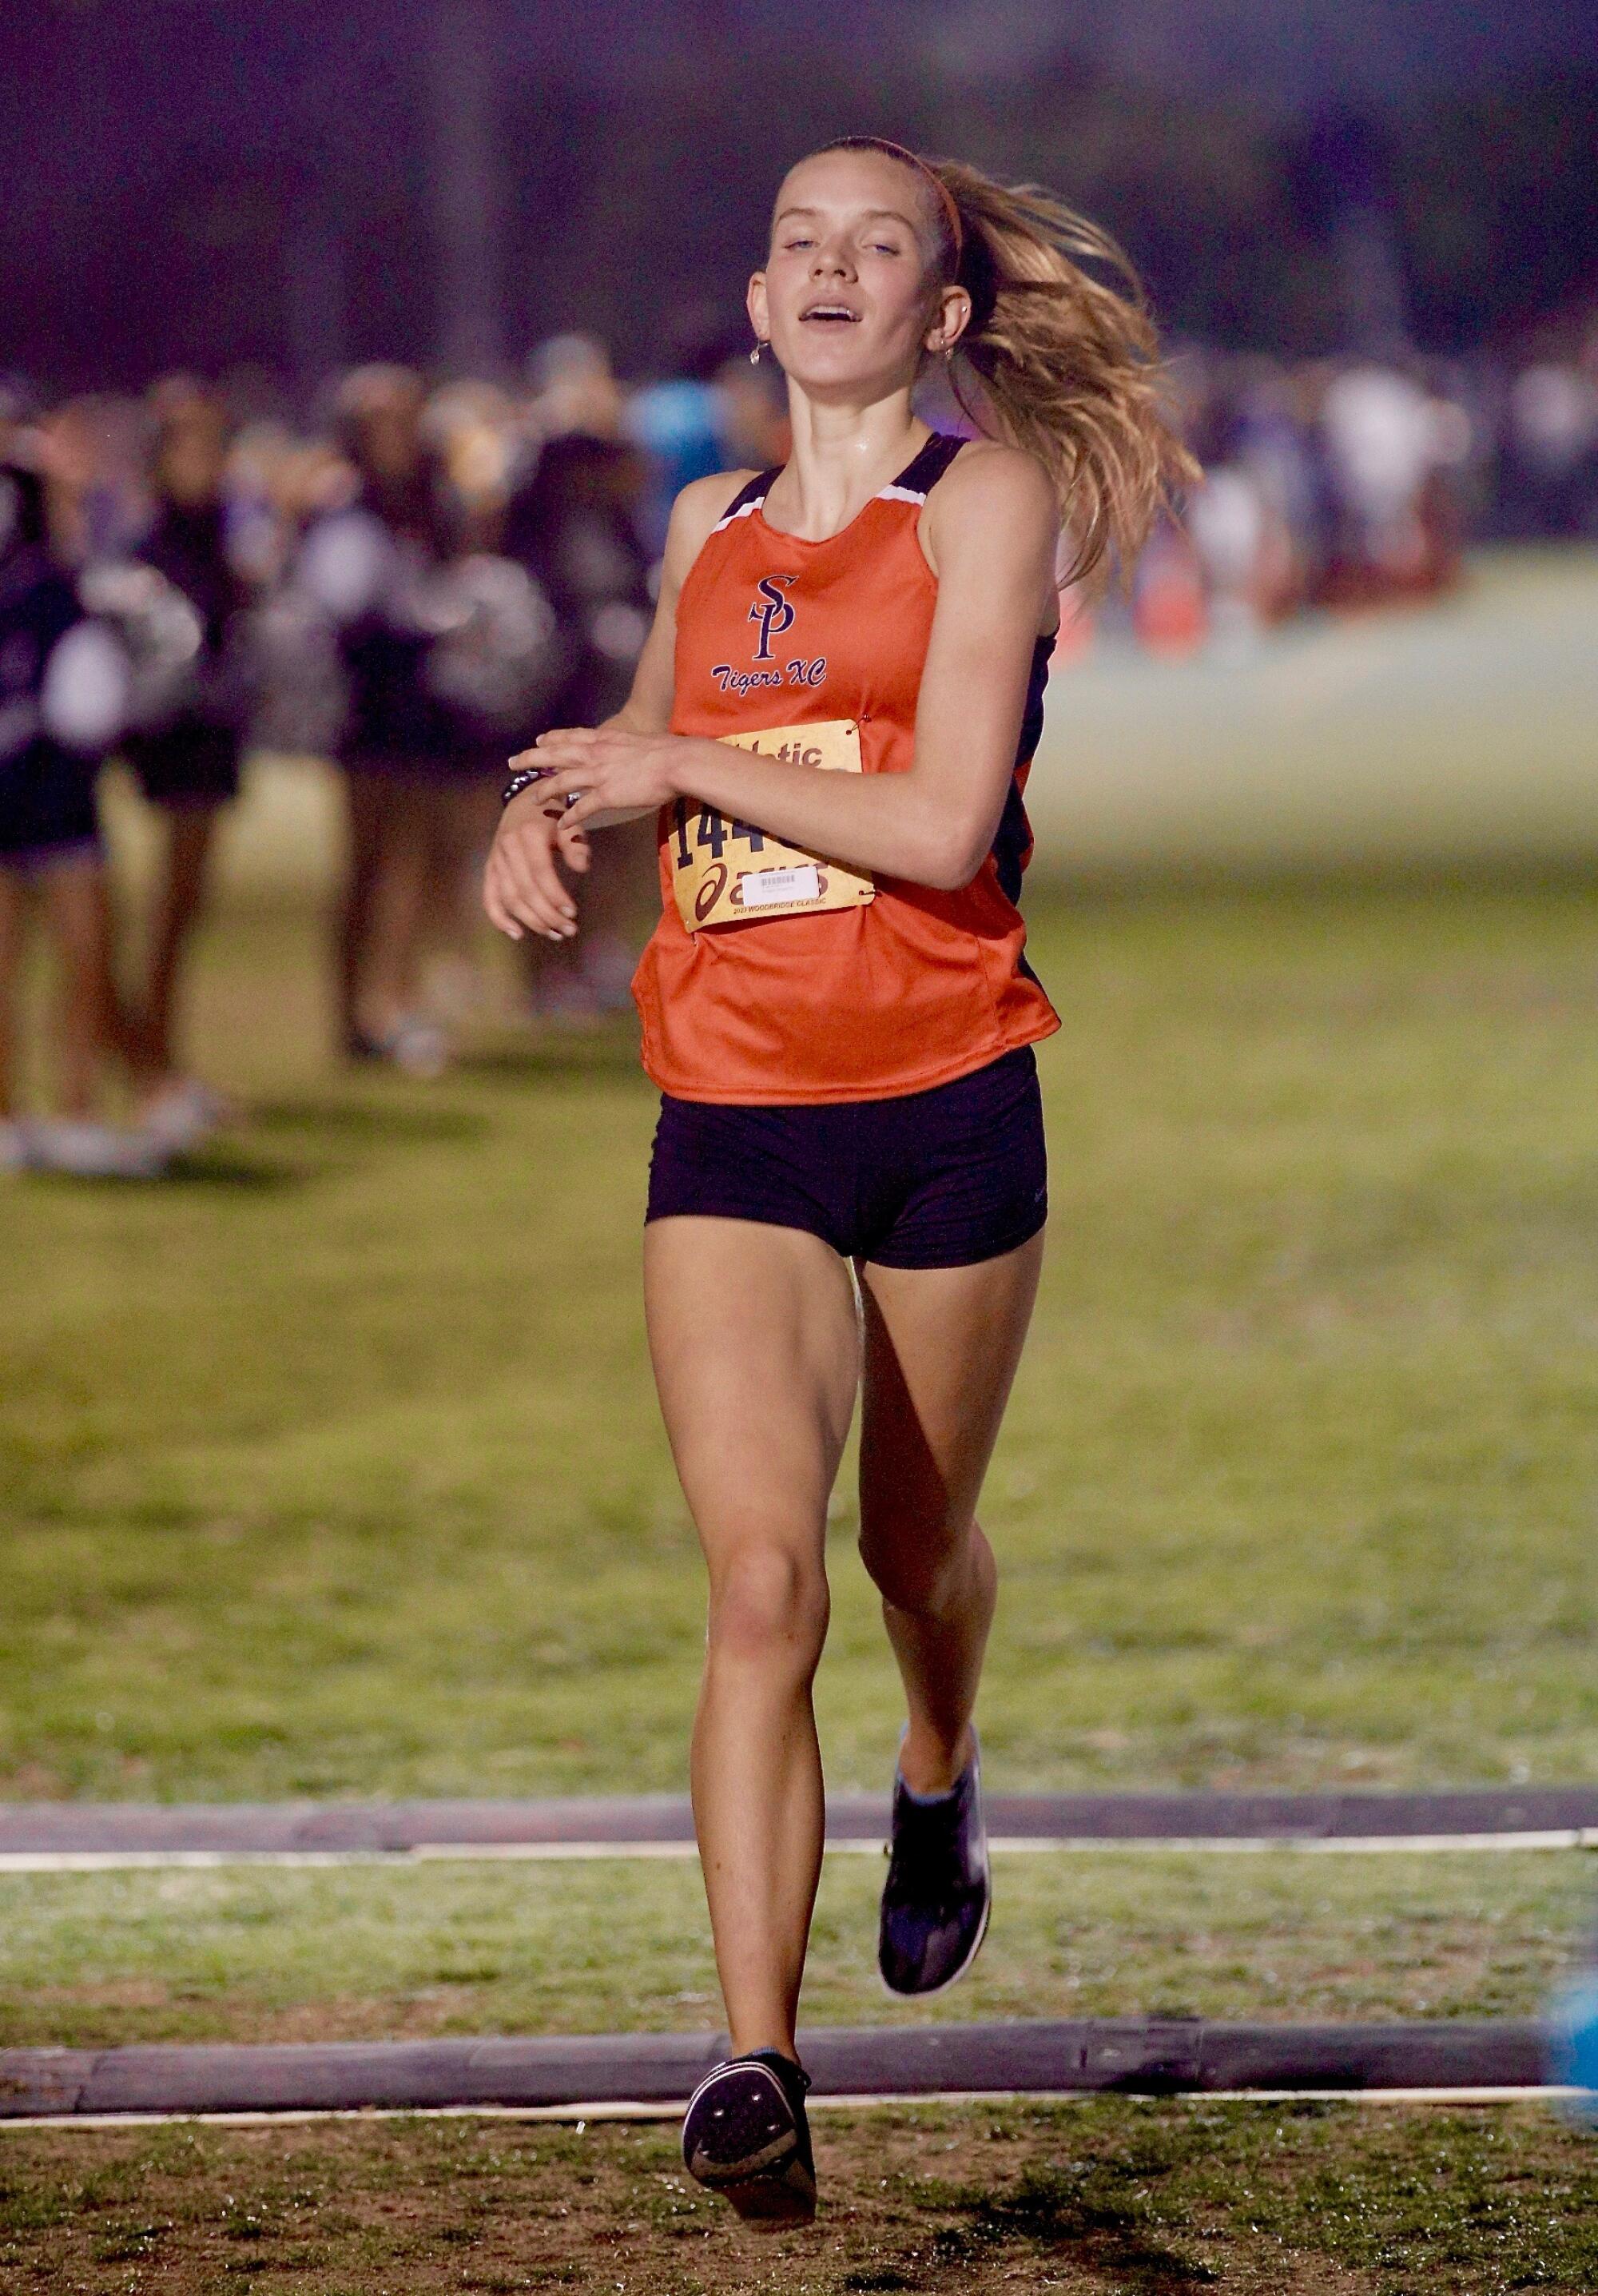 South Pasadena junior Abigail Errington wins the girls' rated race while leading the Tigers to first out of 31 teams.